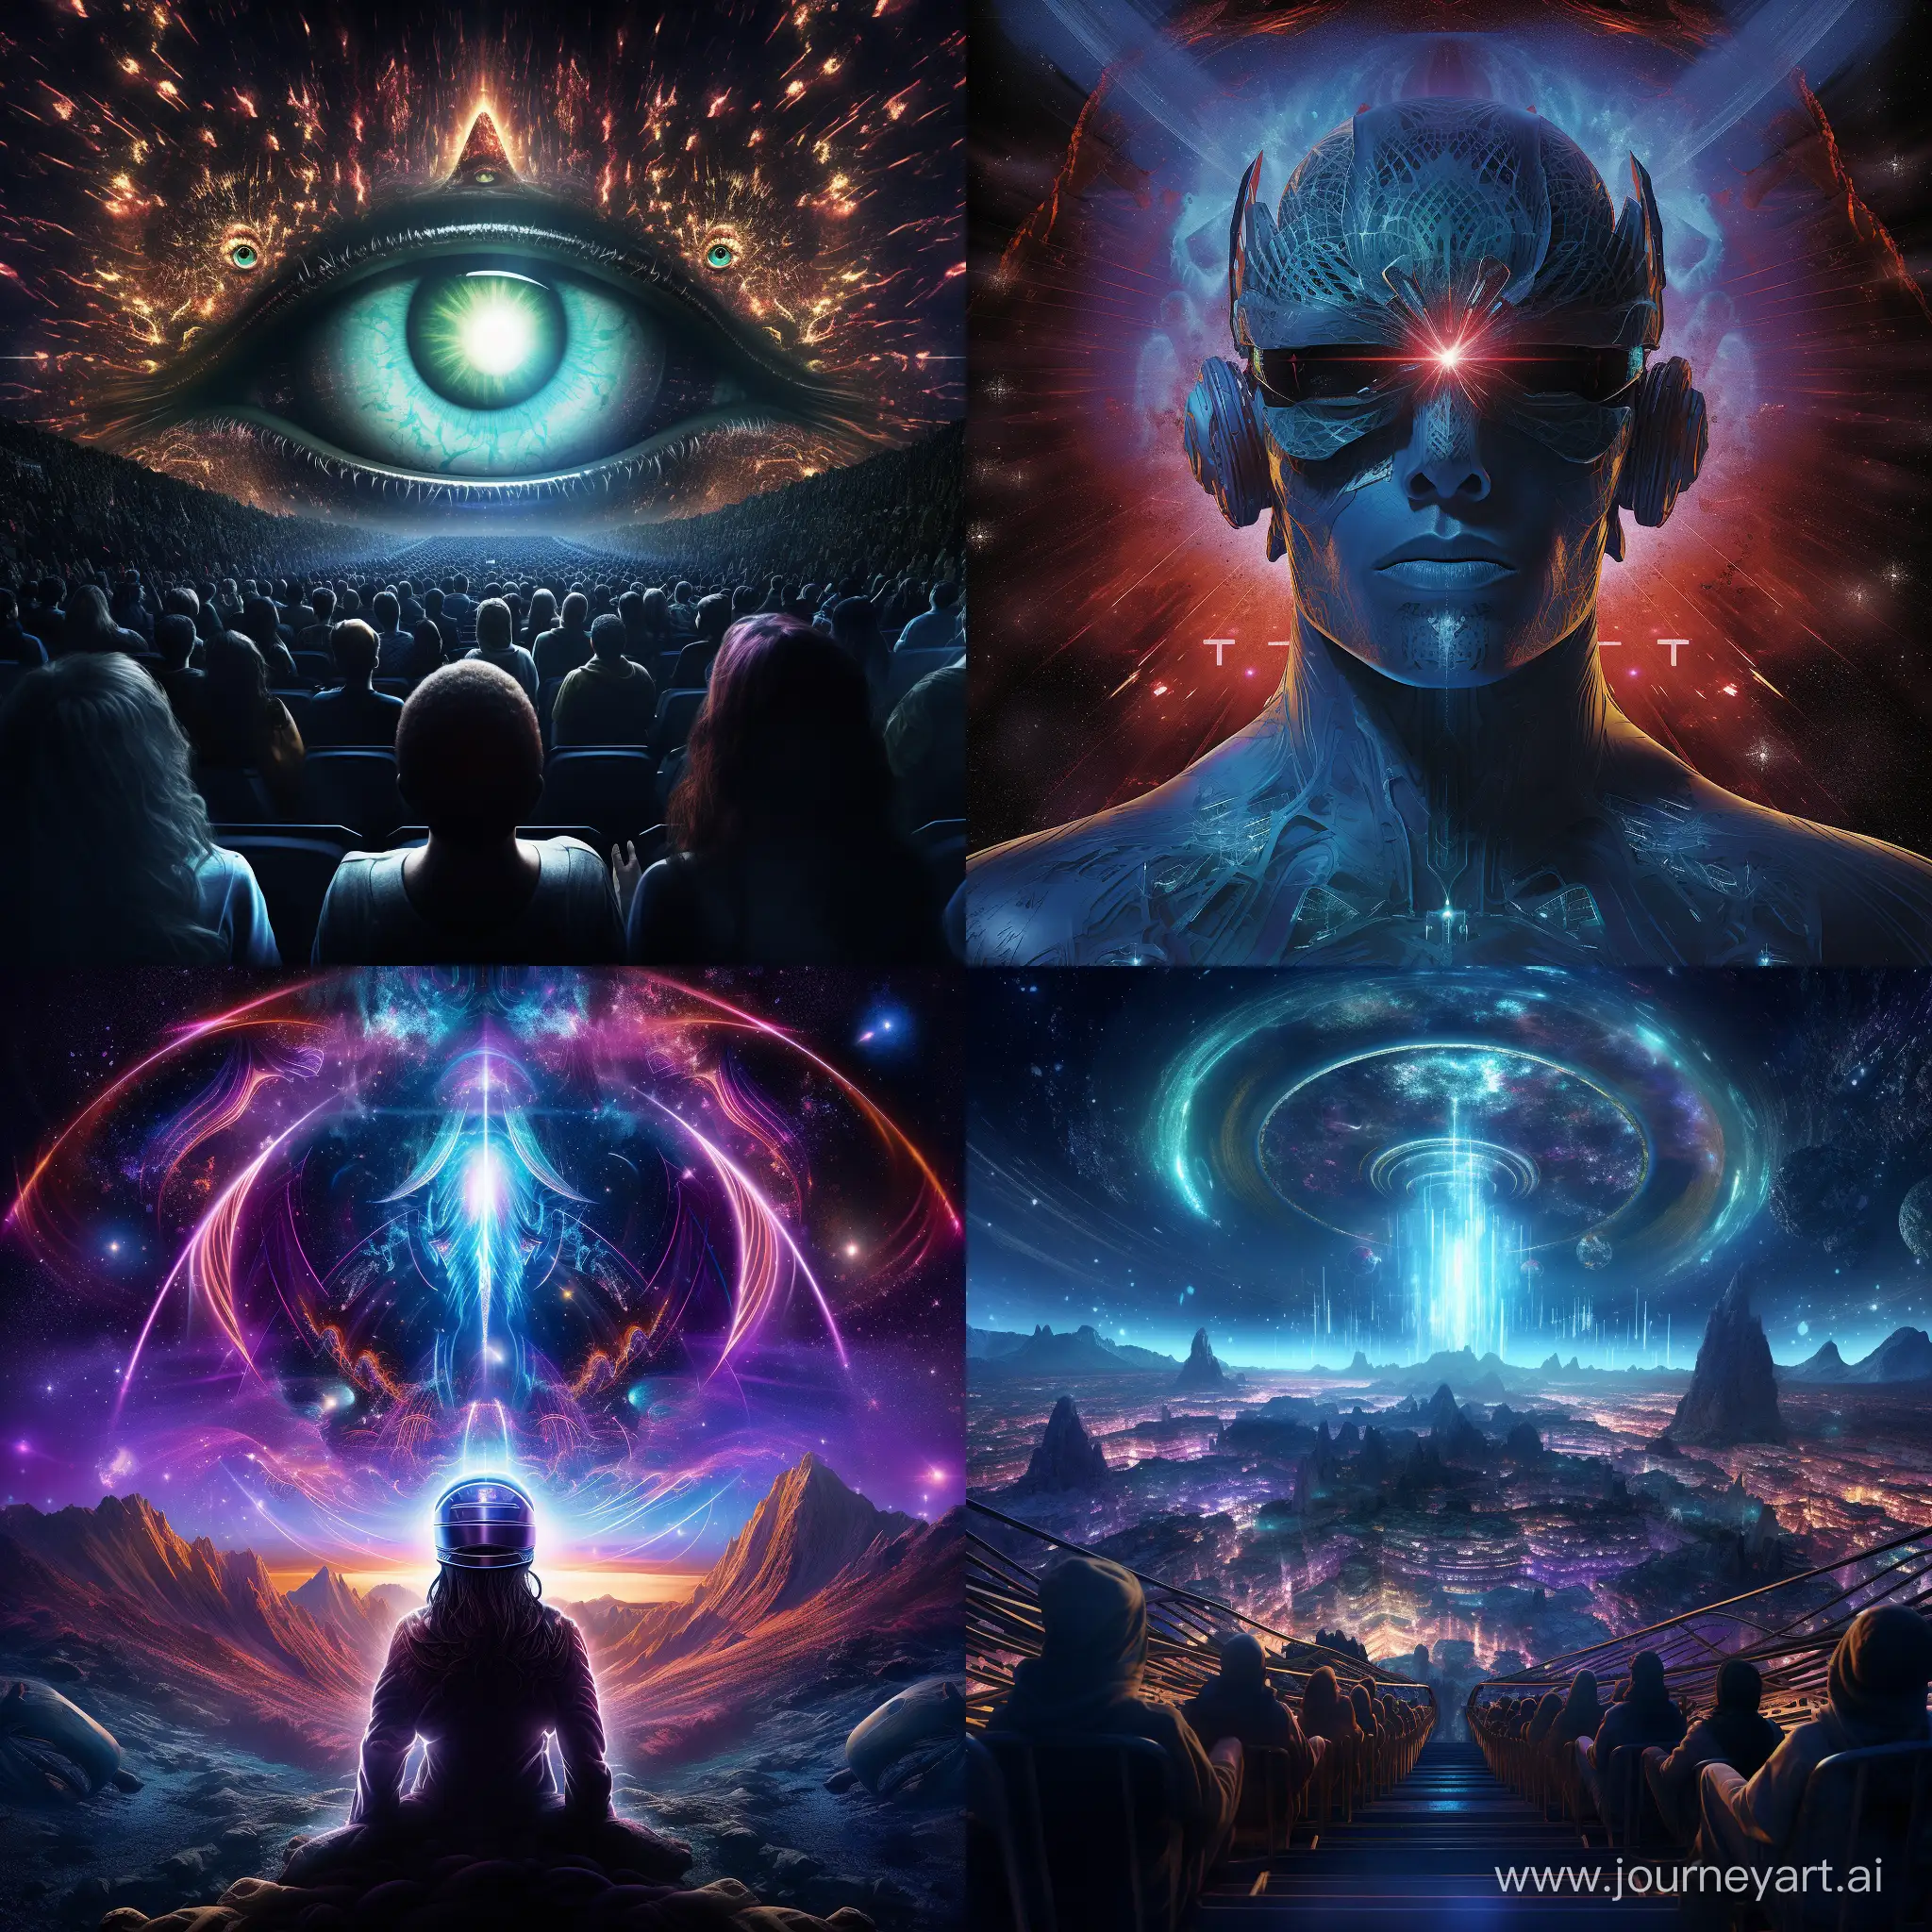 iMax 5d with lasers that allow you to watch the movie with your pineal gland in the astral realm